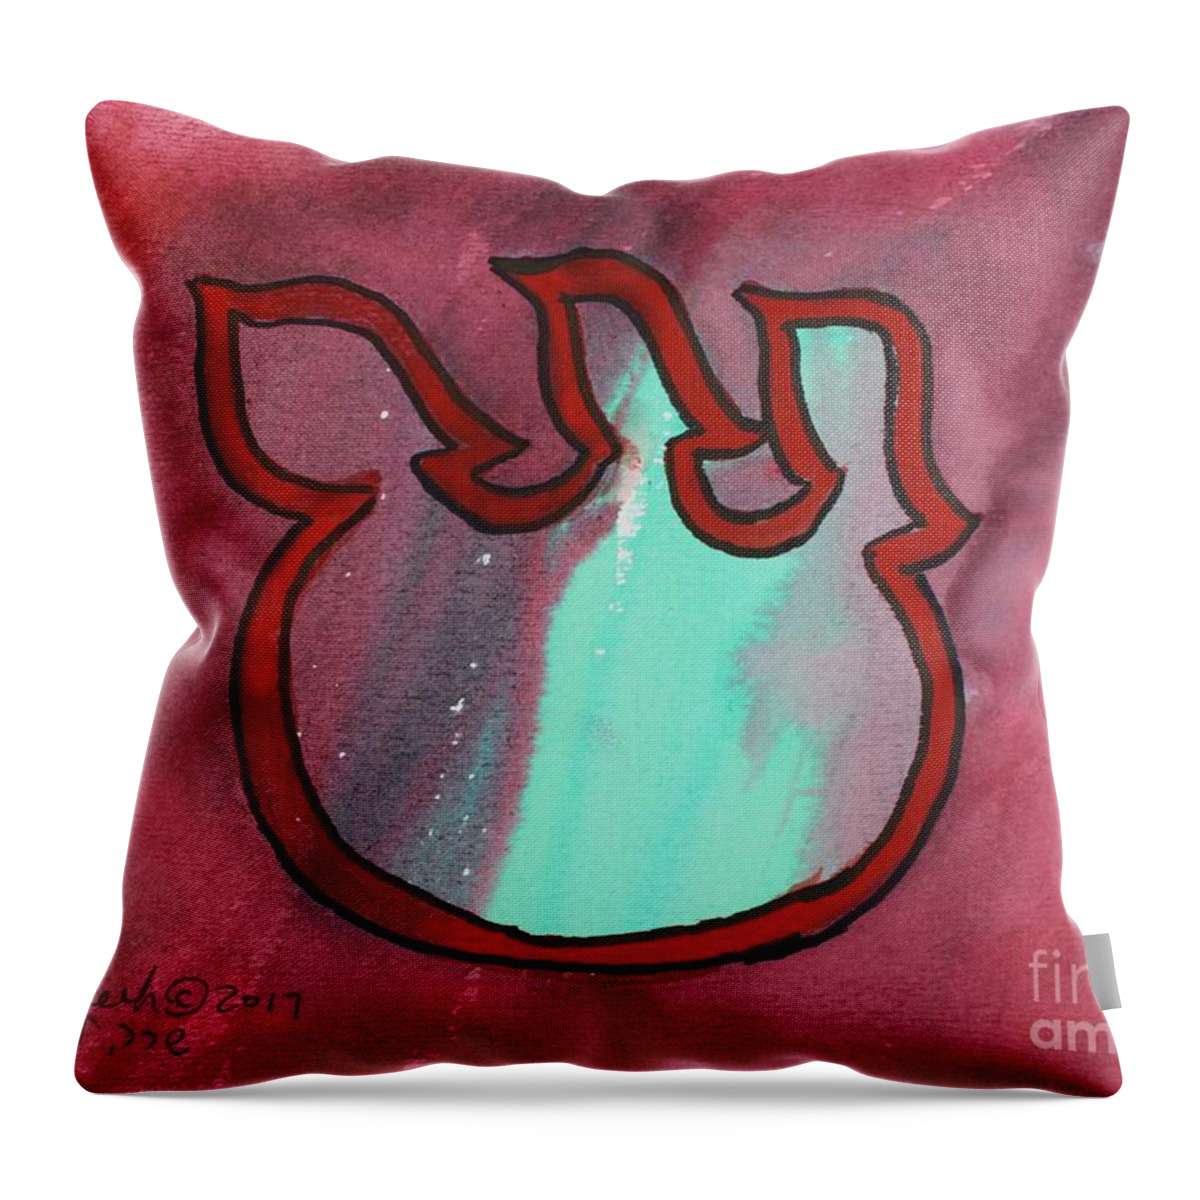 Shin Floating Tooth Throw Pillow featuring the painting Floating Shin by Hebrewletters SL